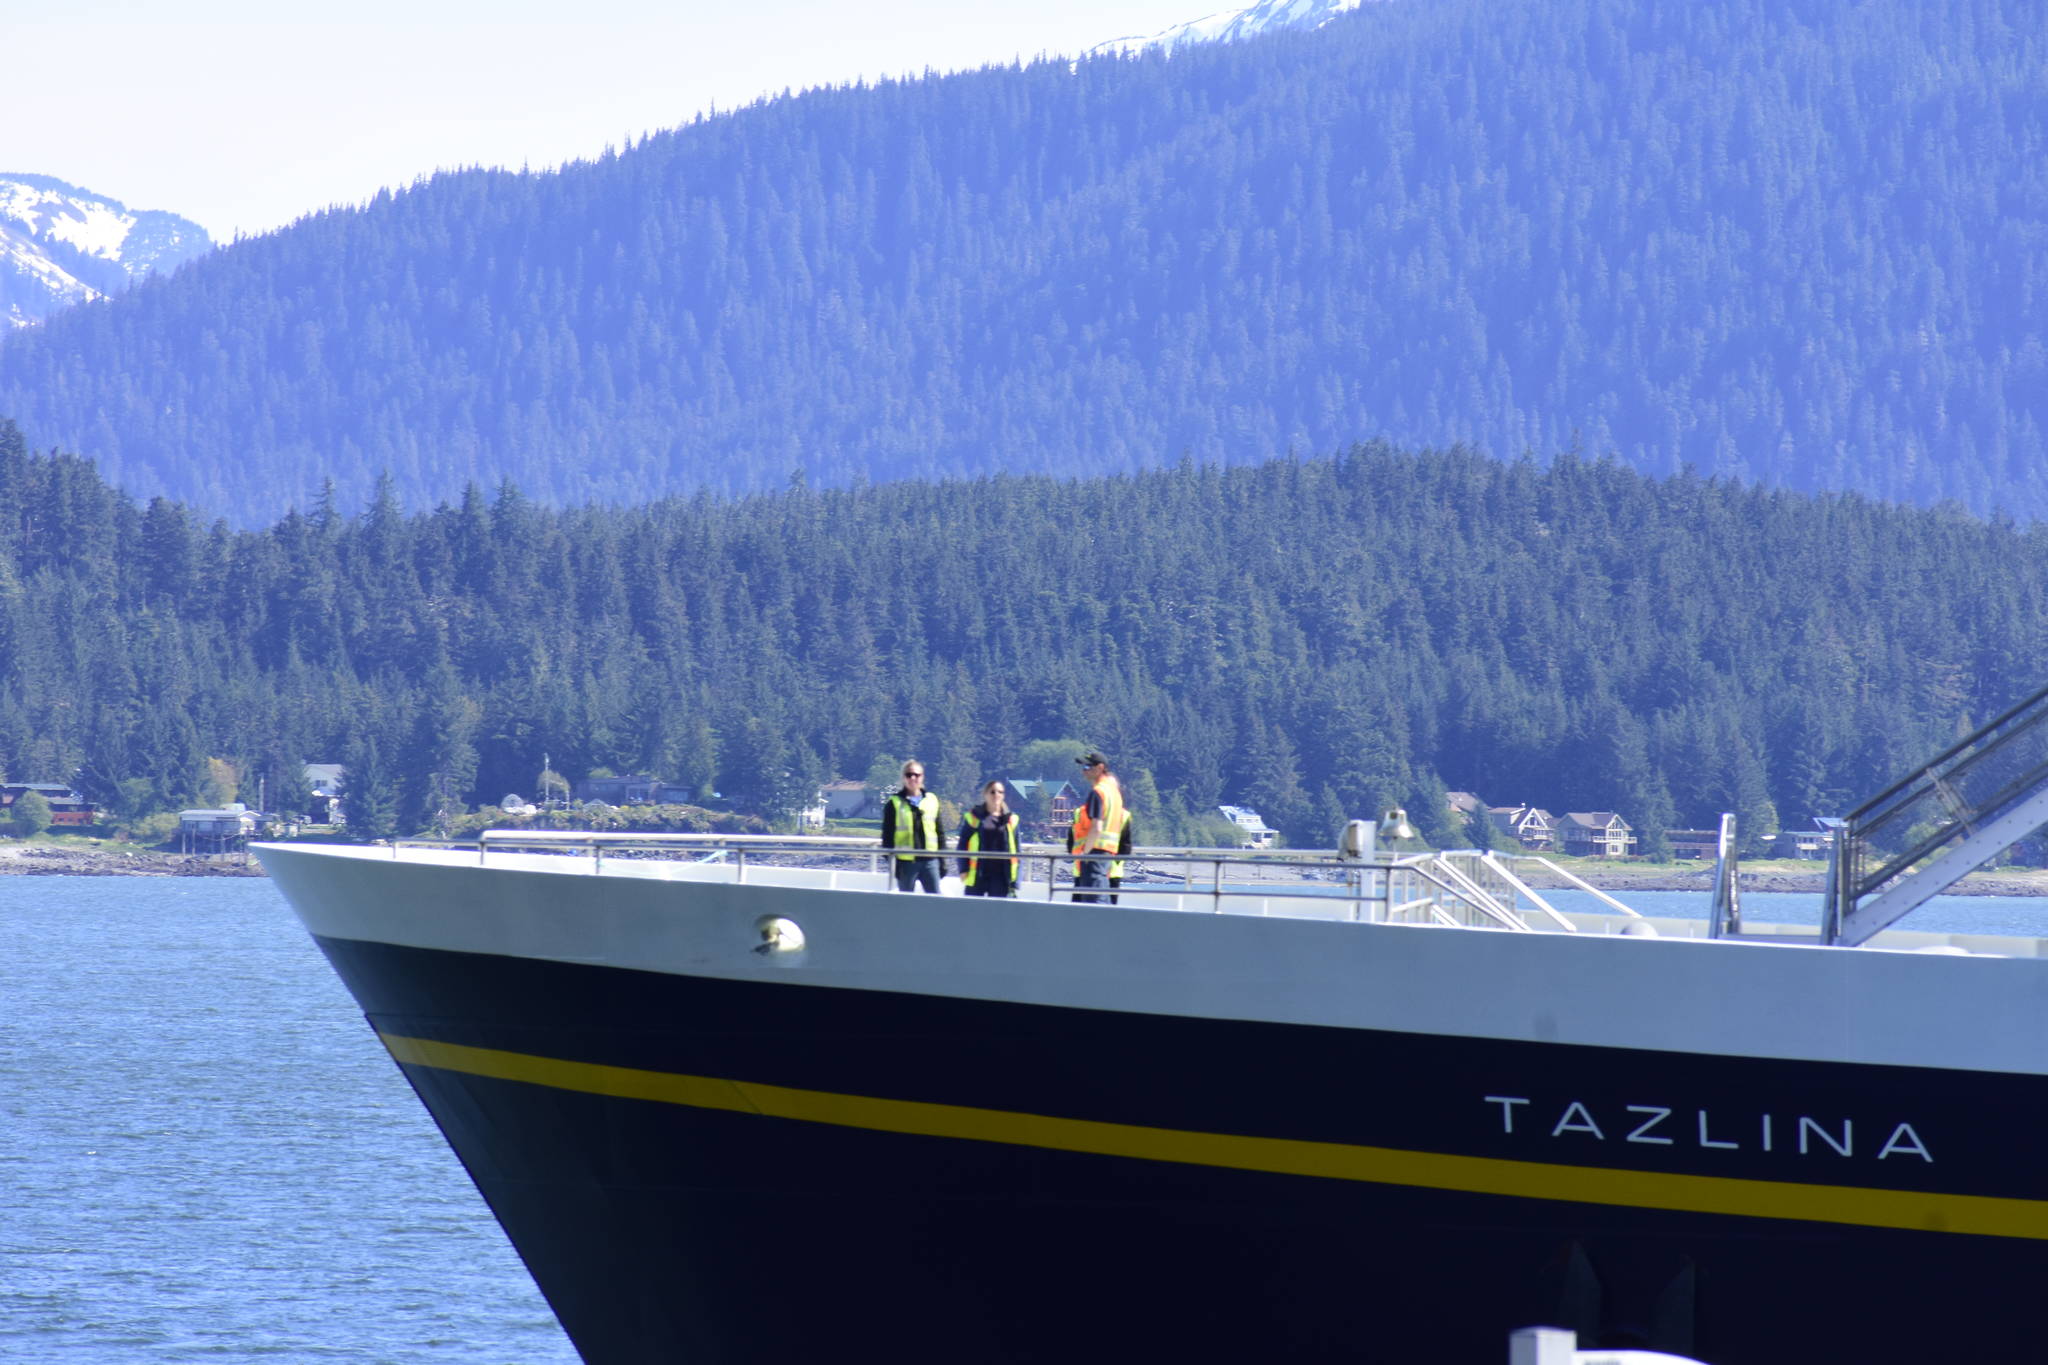 Peter Segall / Juneau Empire file                                Crew members on the Tazlina standby as the vessel docks at the Auke Bay Ferry Terminal on May 16.